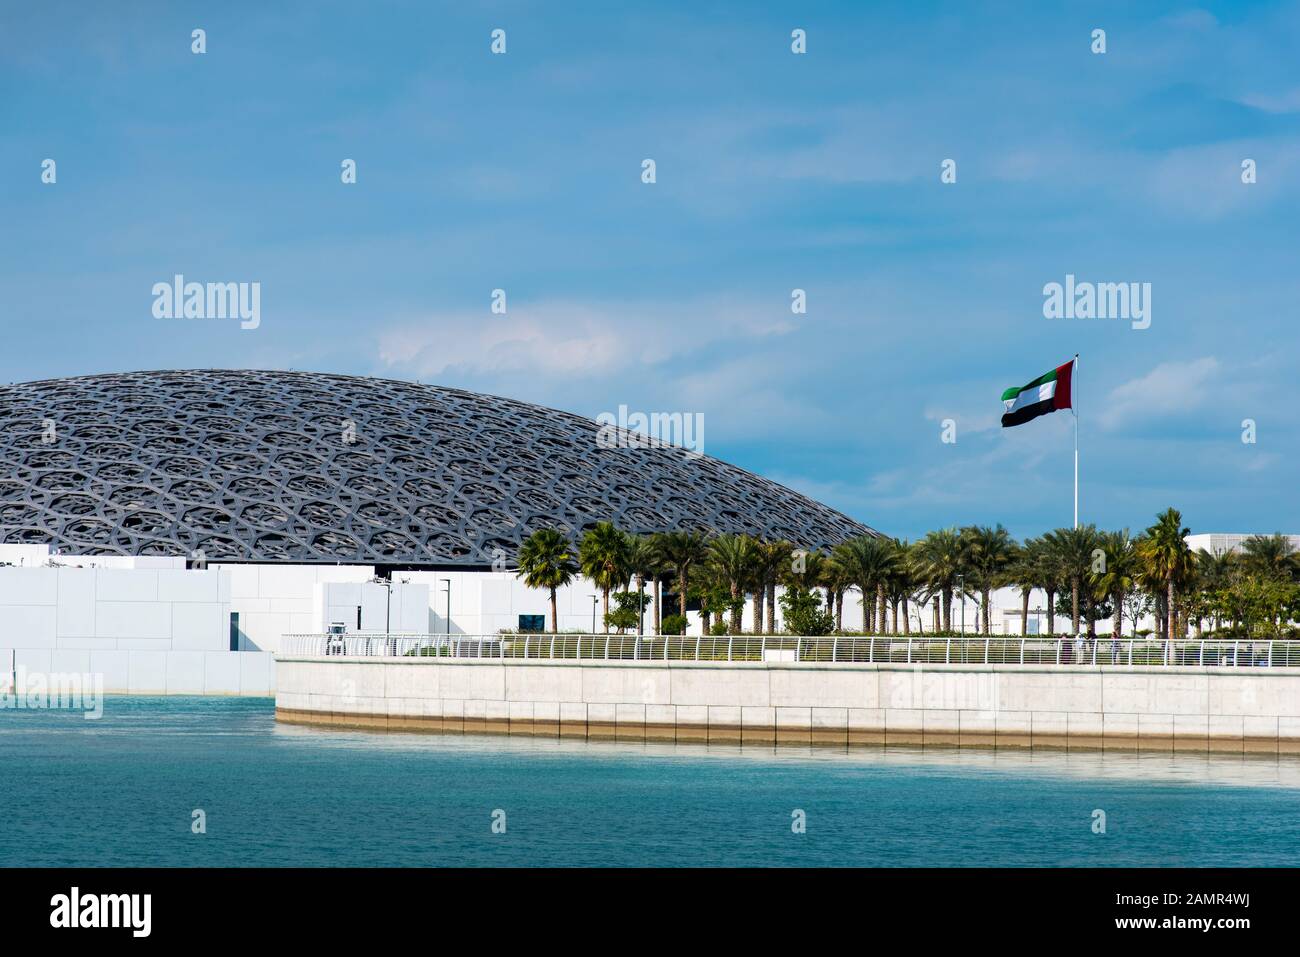 Abu Dhabi, United Arab Emirates - December 20, 2019: Louvre museum in Abu Dhabi exterior with characteristic architecture on a sunny day Stock Photo